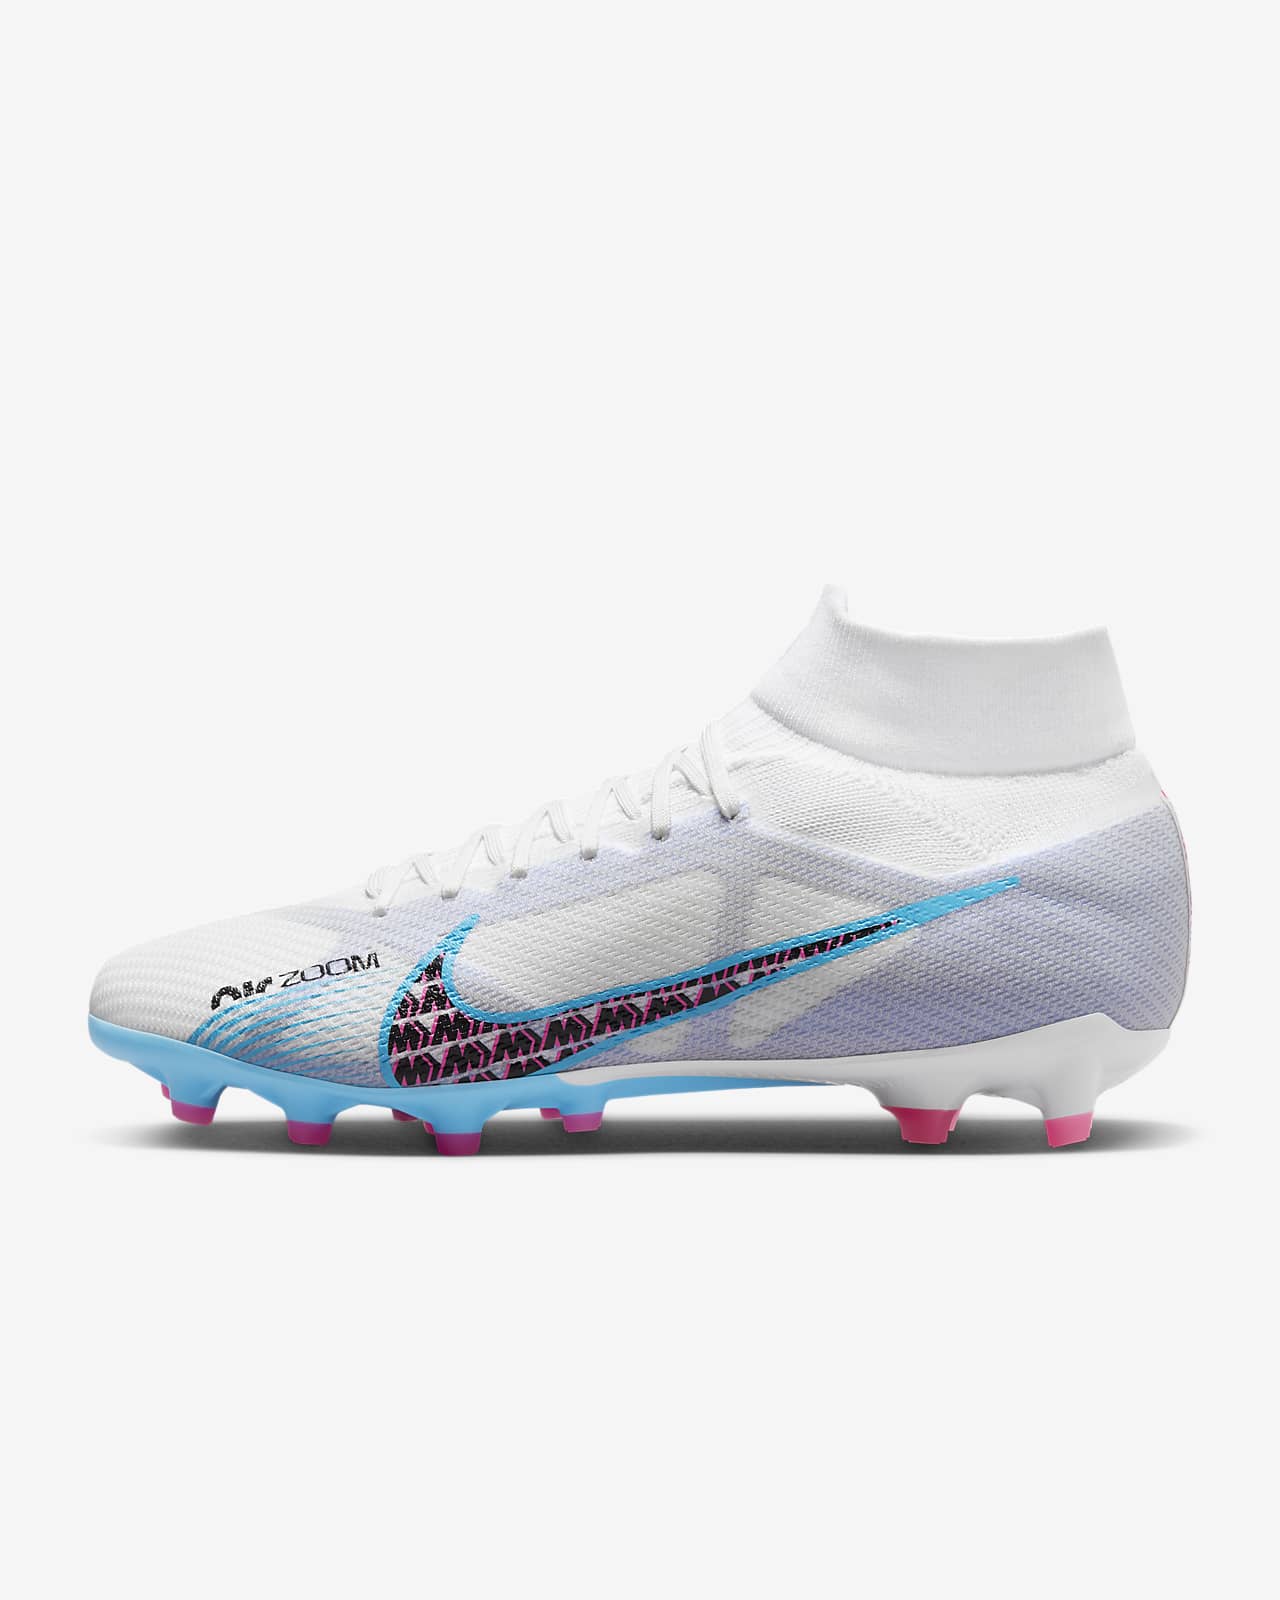 Nike Zoom Mercurial Superfly 9 Pro AG-Pro Artificial-Grass Football Cleats. Nike